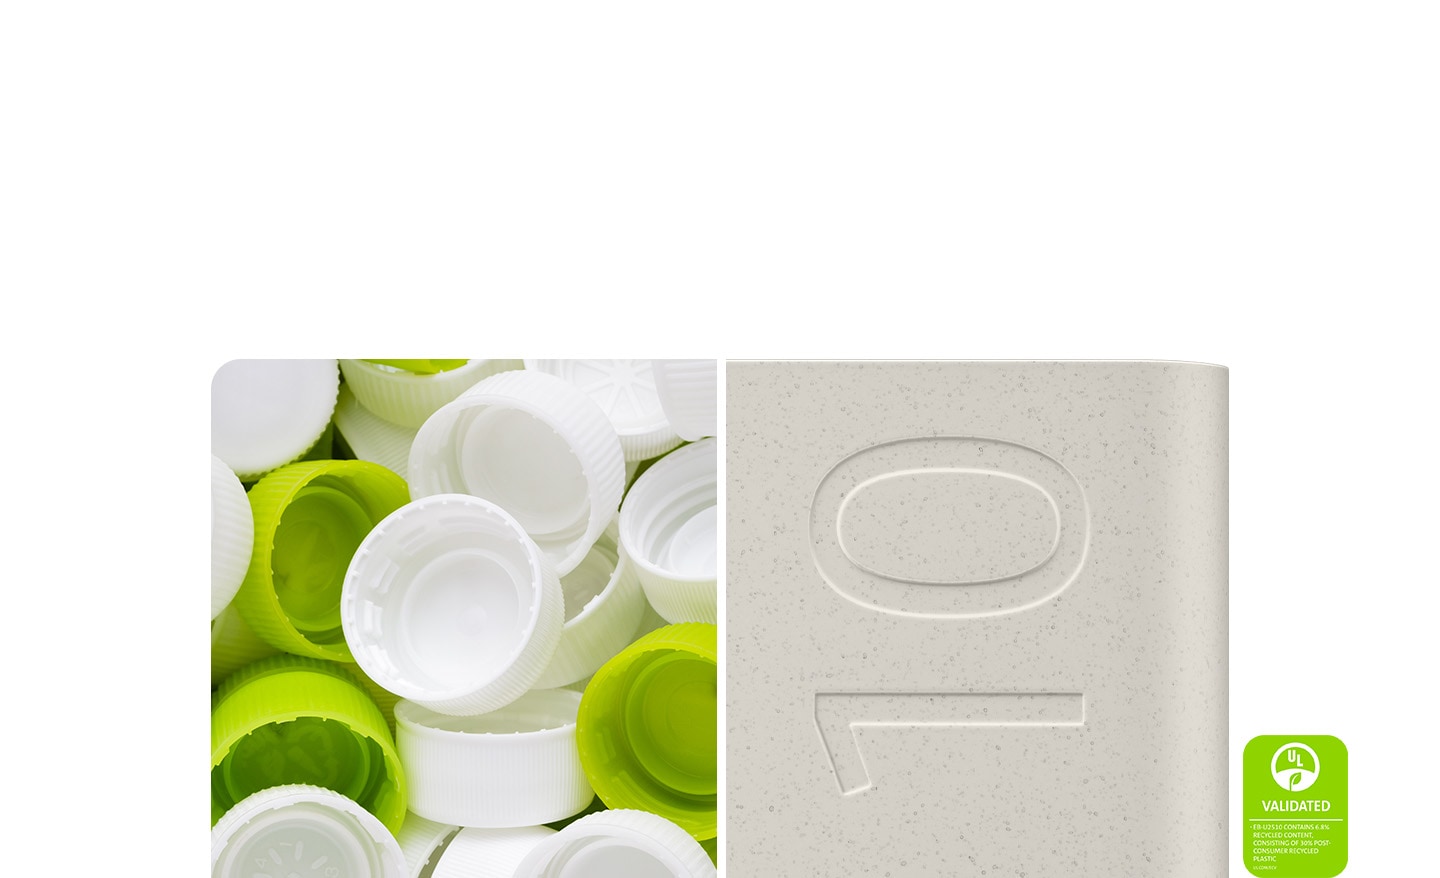 With left side showing a pile of white and green plastic bottle caps and the right side displaying a close-up of a grey battery pack with a prominent embossed ’10’. A 'UL Validated' badge indicates the product has been certified for EB-P4520 contains 5.9% recycled content, consisting of 30% post-consumer recycled plastic.